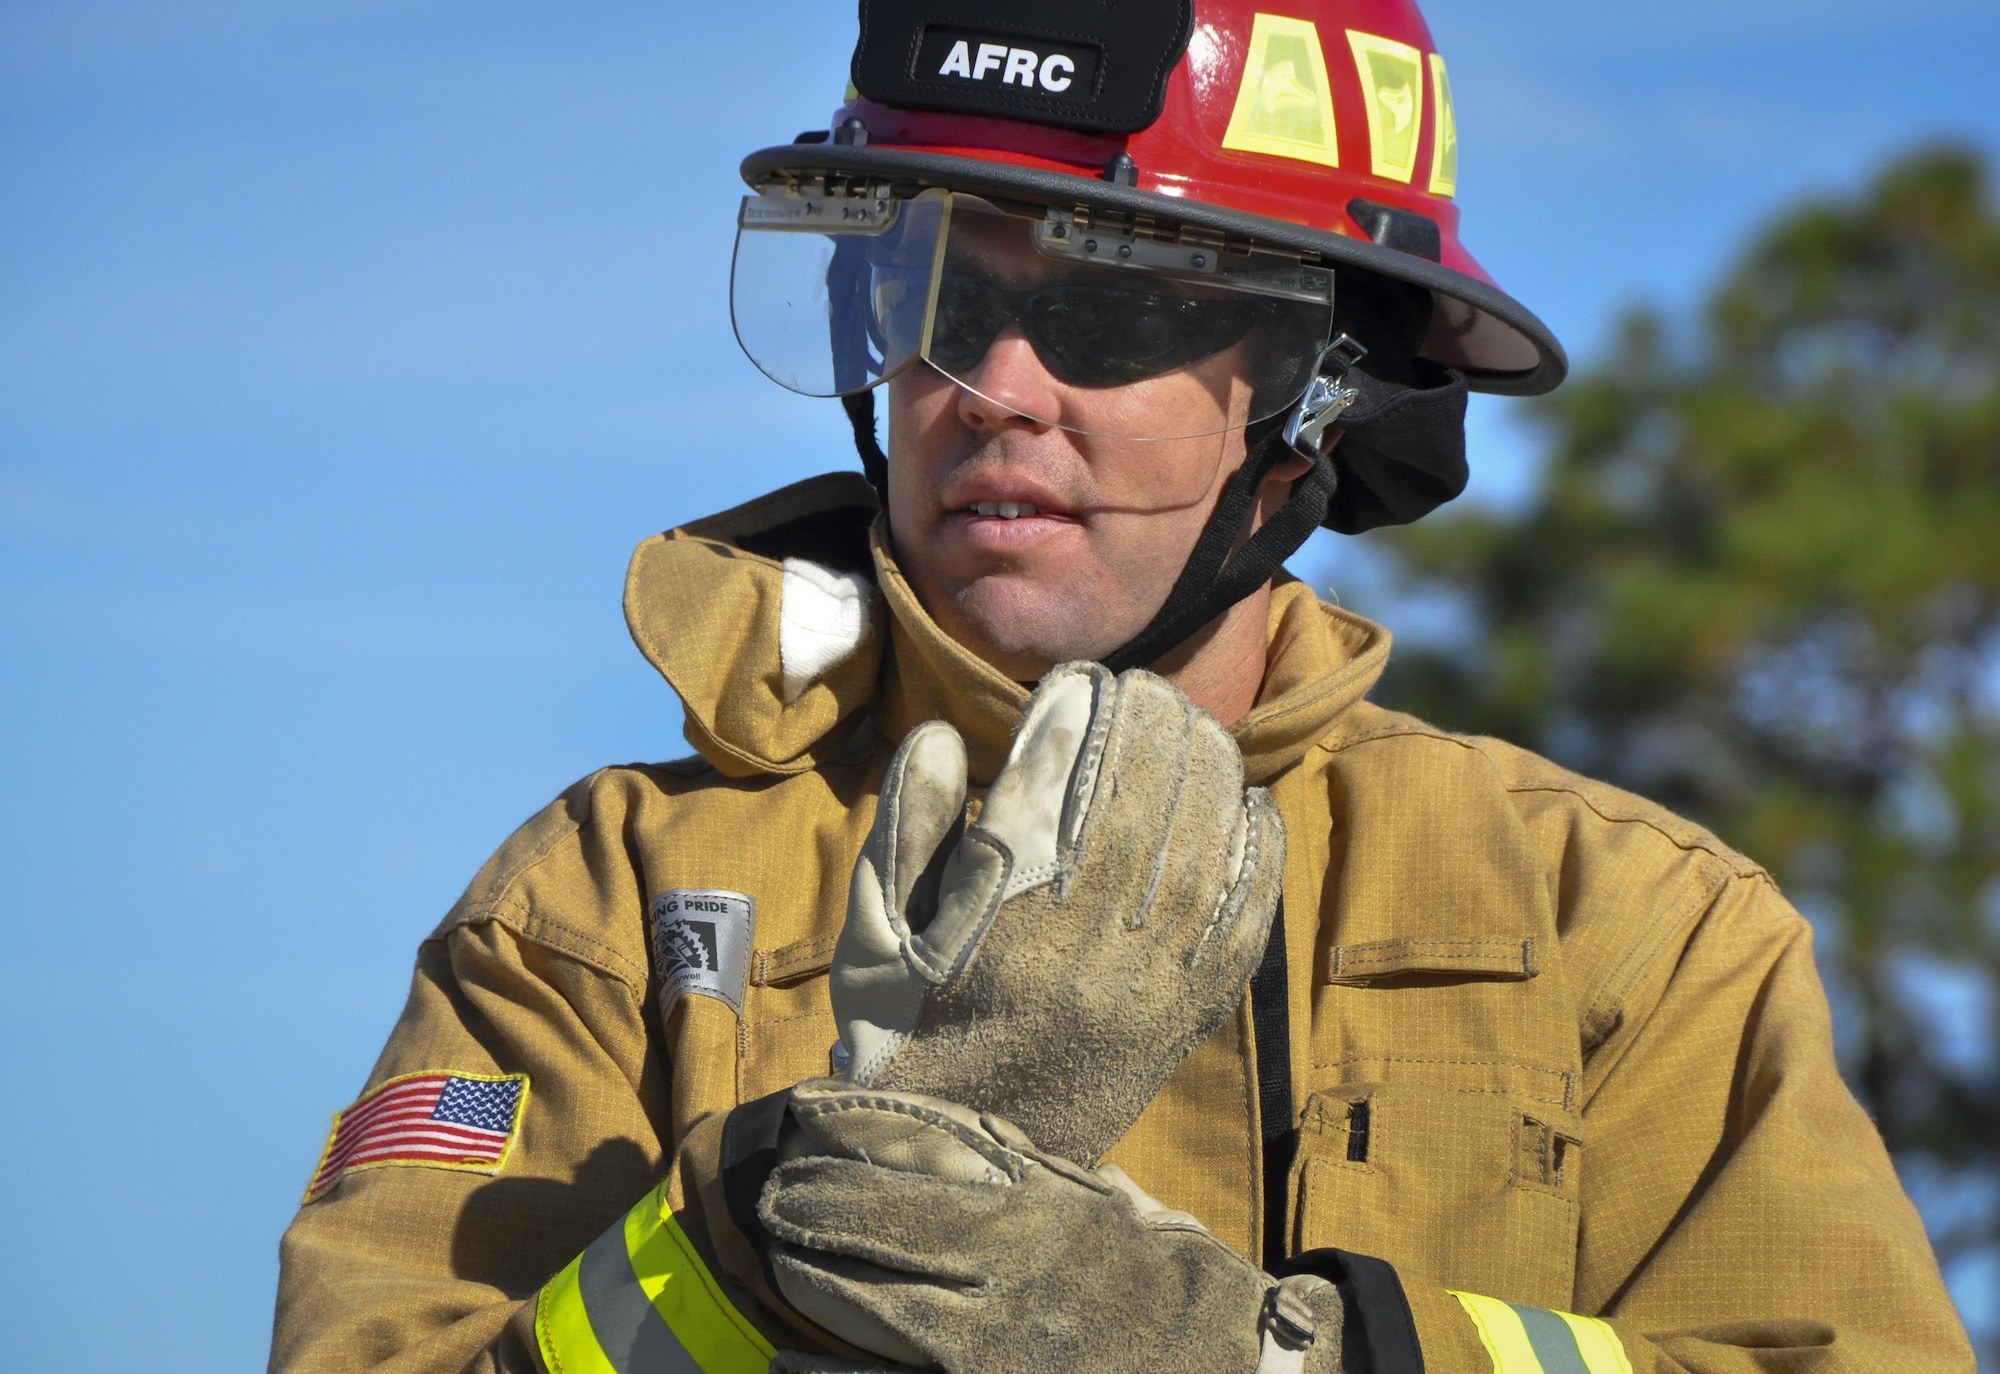 Tech. Sgt. Jeremy Anderson, a 919th Special Operations Wing firefighter, prepares for a car extraction training exercise at Duke Field, Fla., Nov. 6. The wing’s firefighters took part in the exercise to meet their bi-annual training requirement.  (U.S. Air Force photo/Dan Neely)